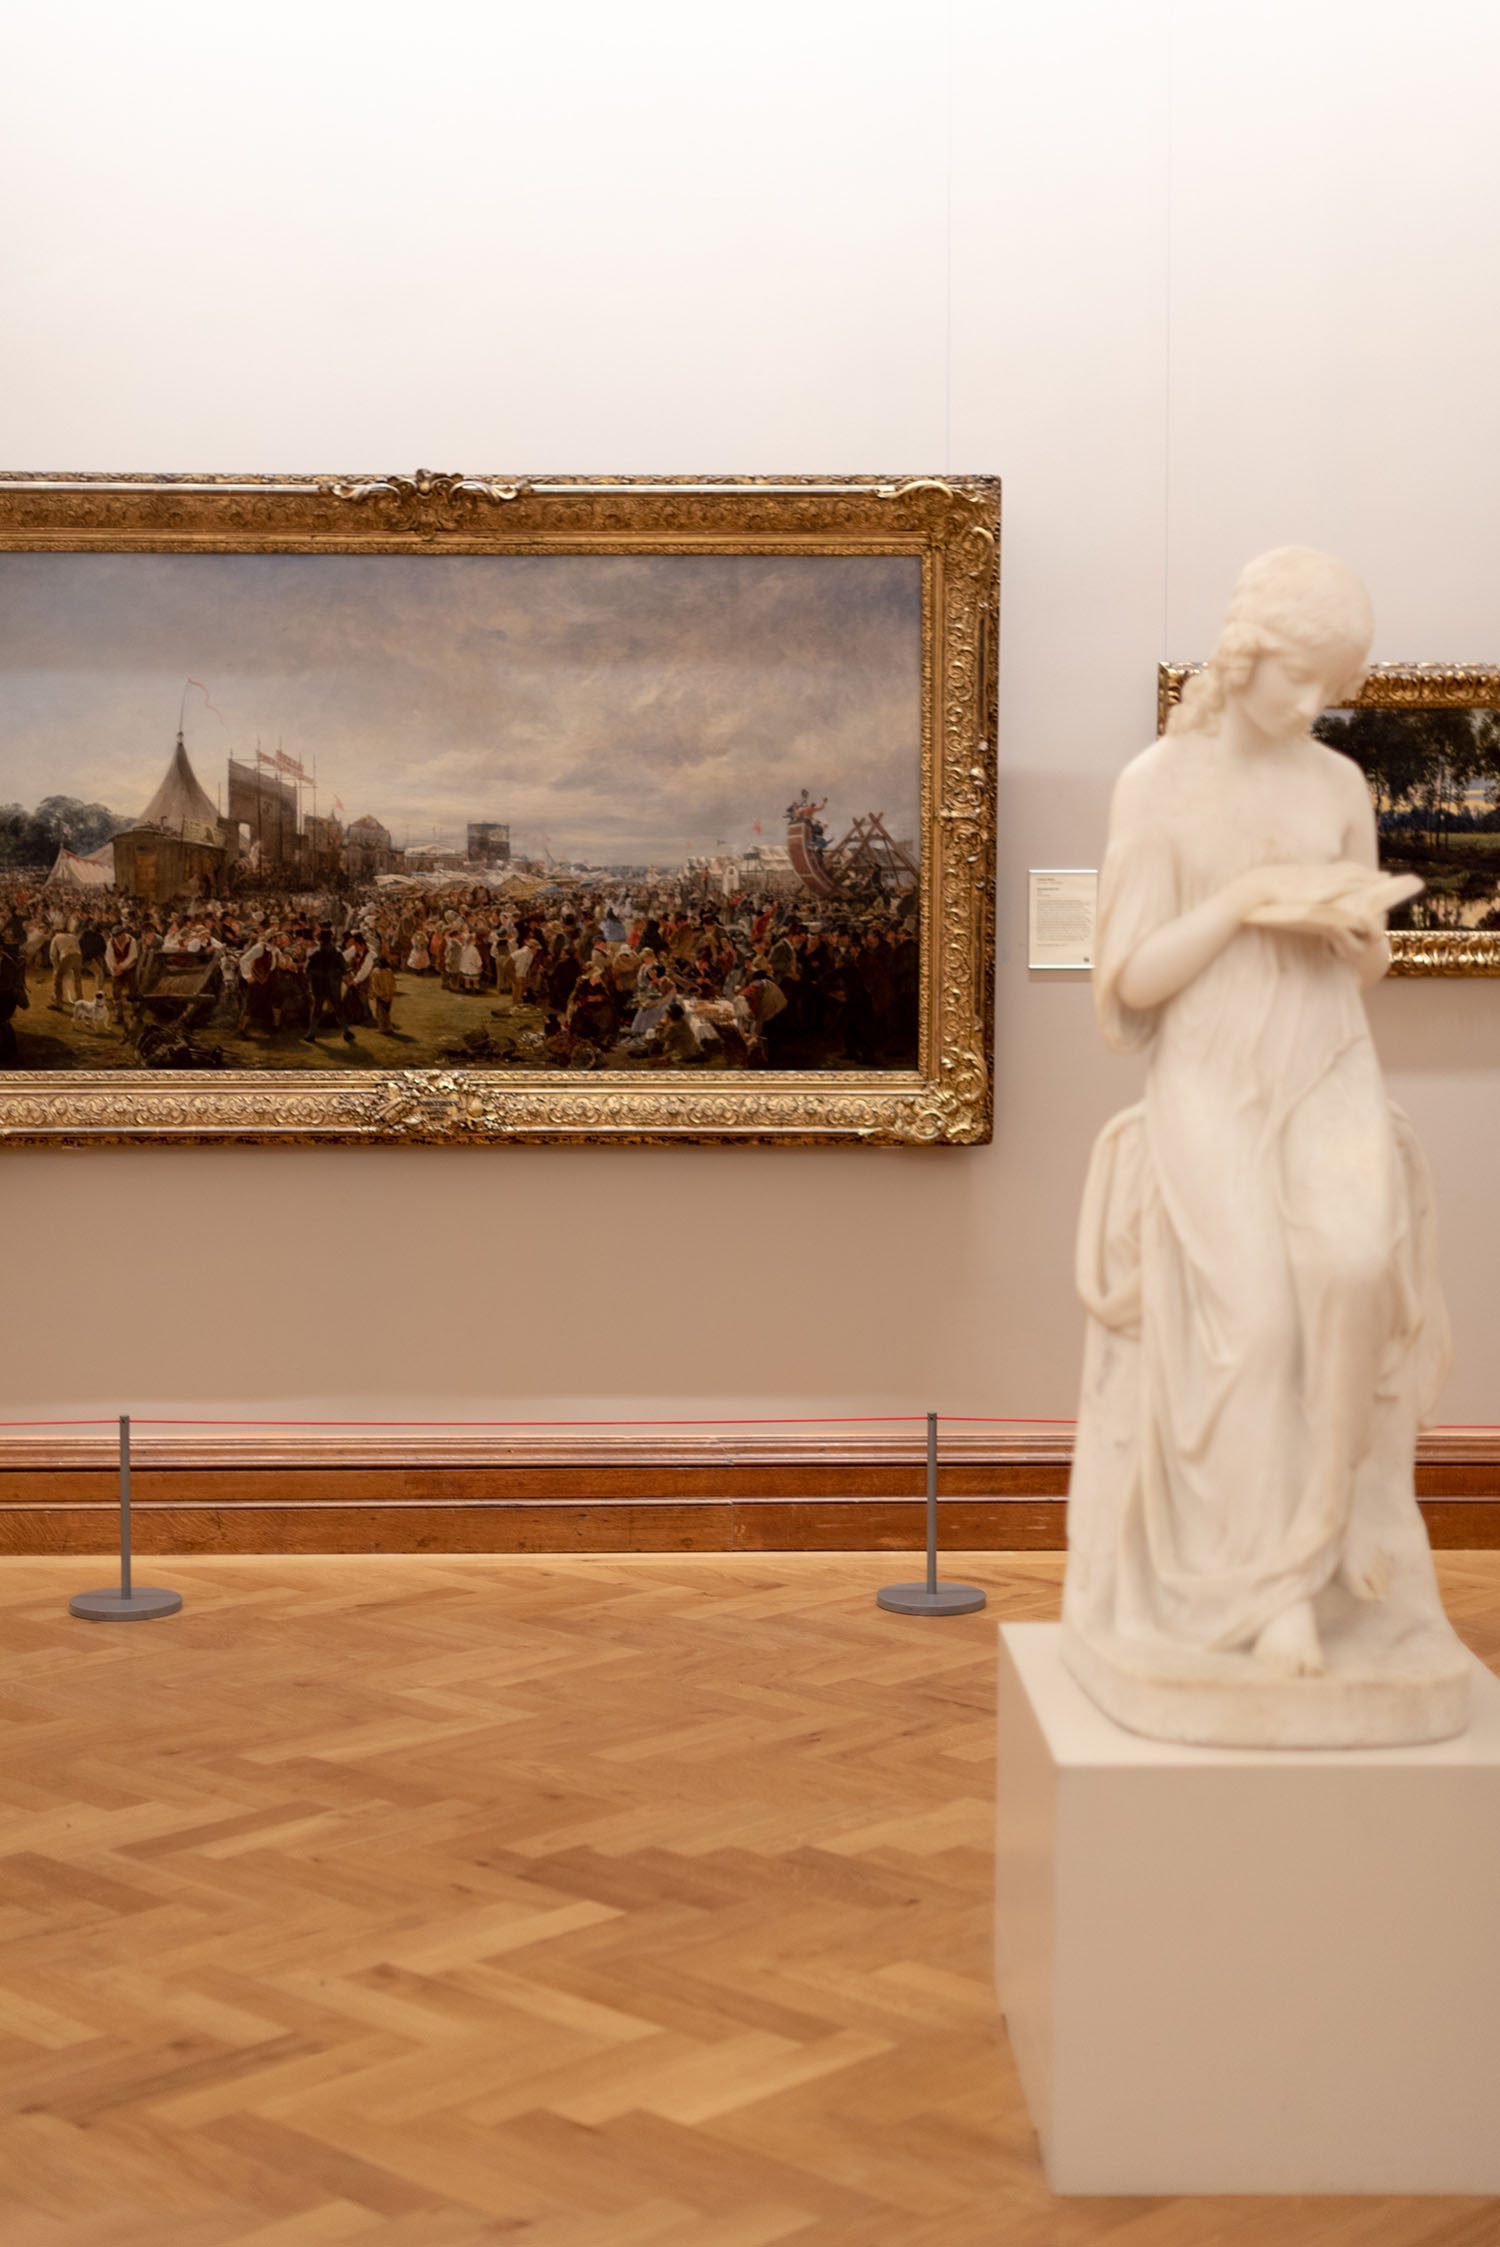 Coco & Vera - Sculpture and painting at National Gallery of Ireland in Dublin